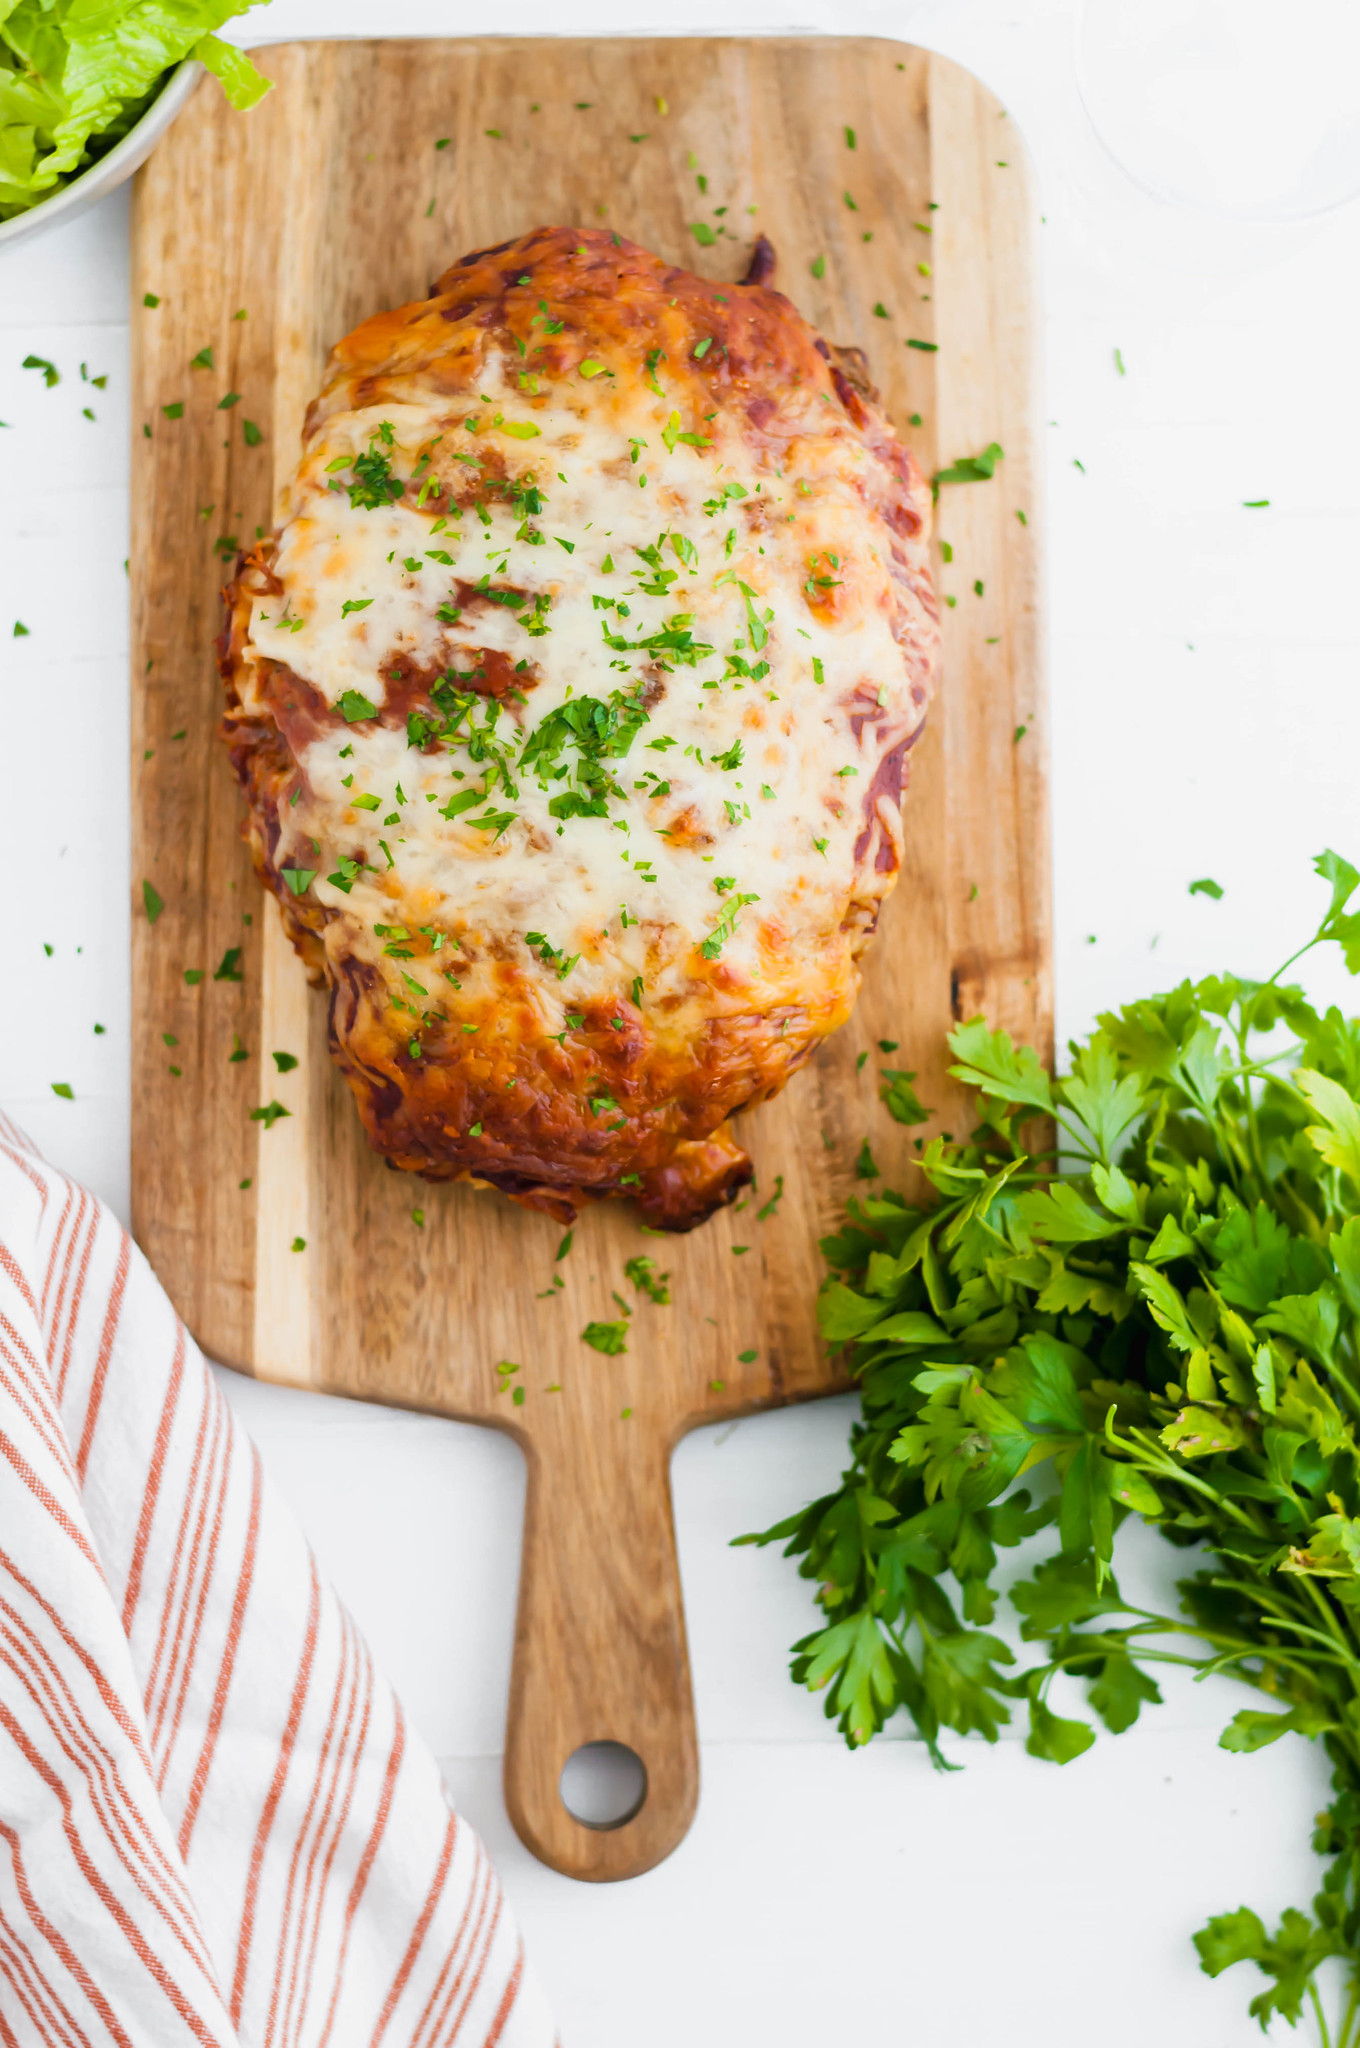 Two dinnertime favorite collide with this Pizza Meatloaf. Pizza ingredients throughout the meatloaf and on top puts that pizza flavor over the top.